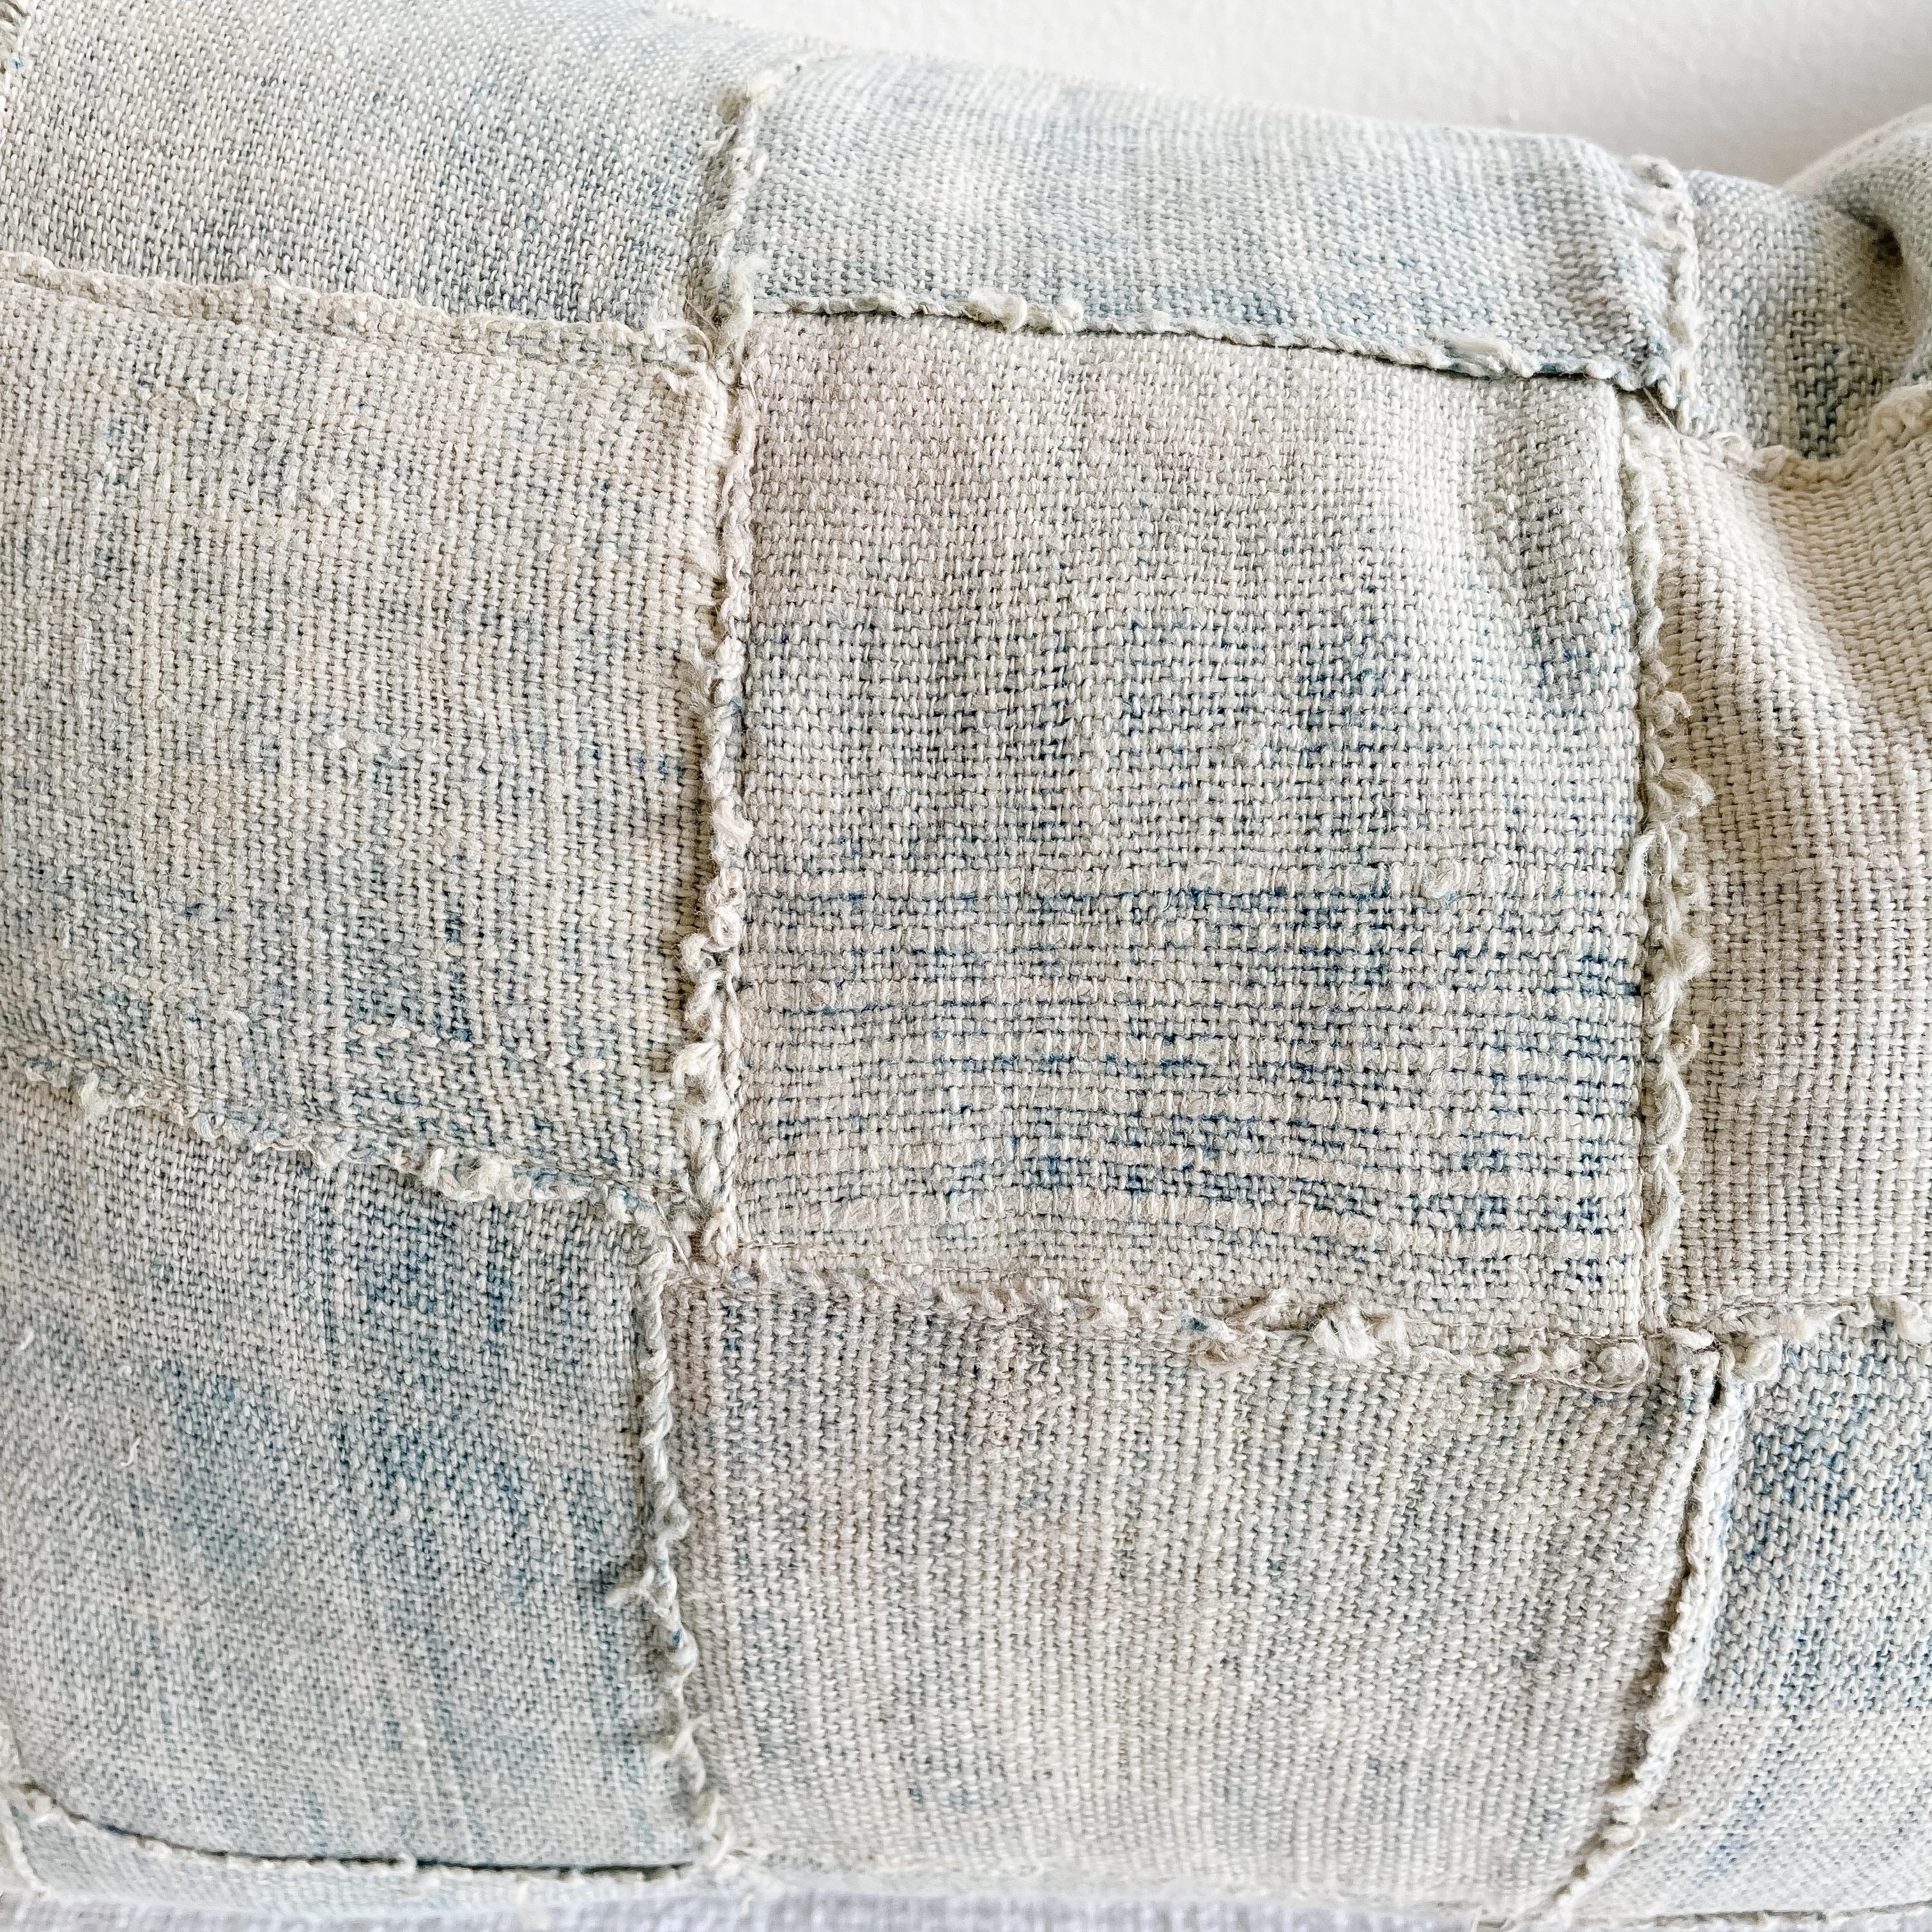 This vintage textile pillow face features a vintage batik front, we've designed this to have a basket woven face by interlocking the strips to create an even pattern and coloring. The backing is Belgian linen in natural linen. Our pillows are